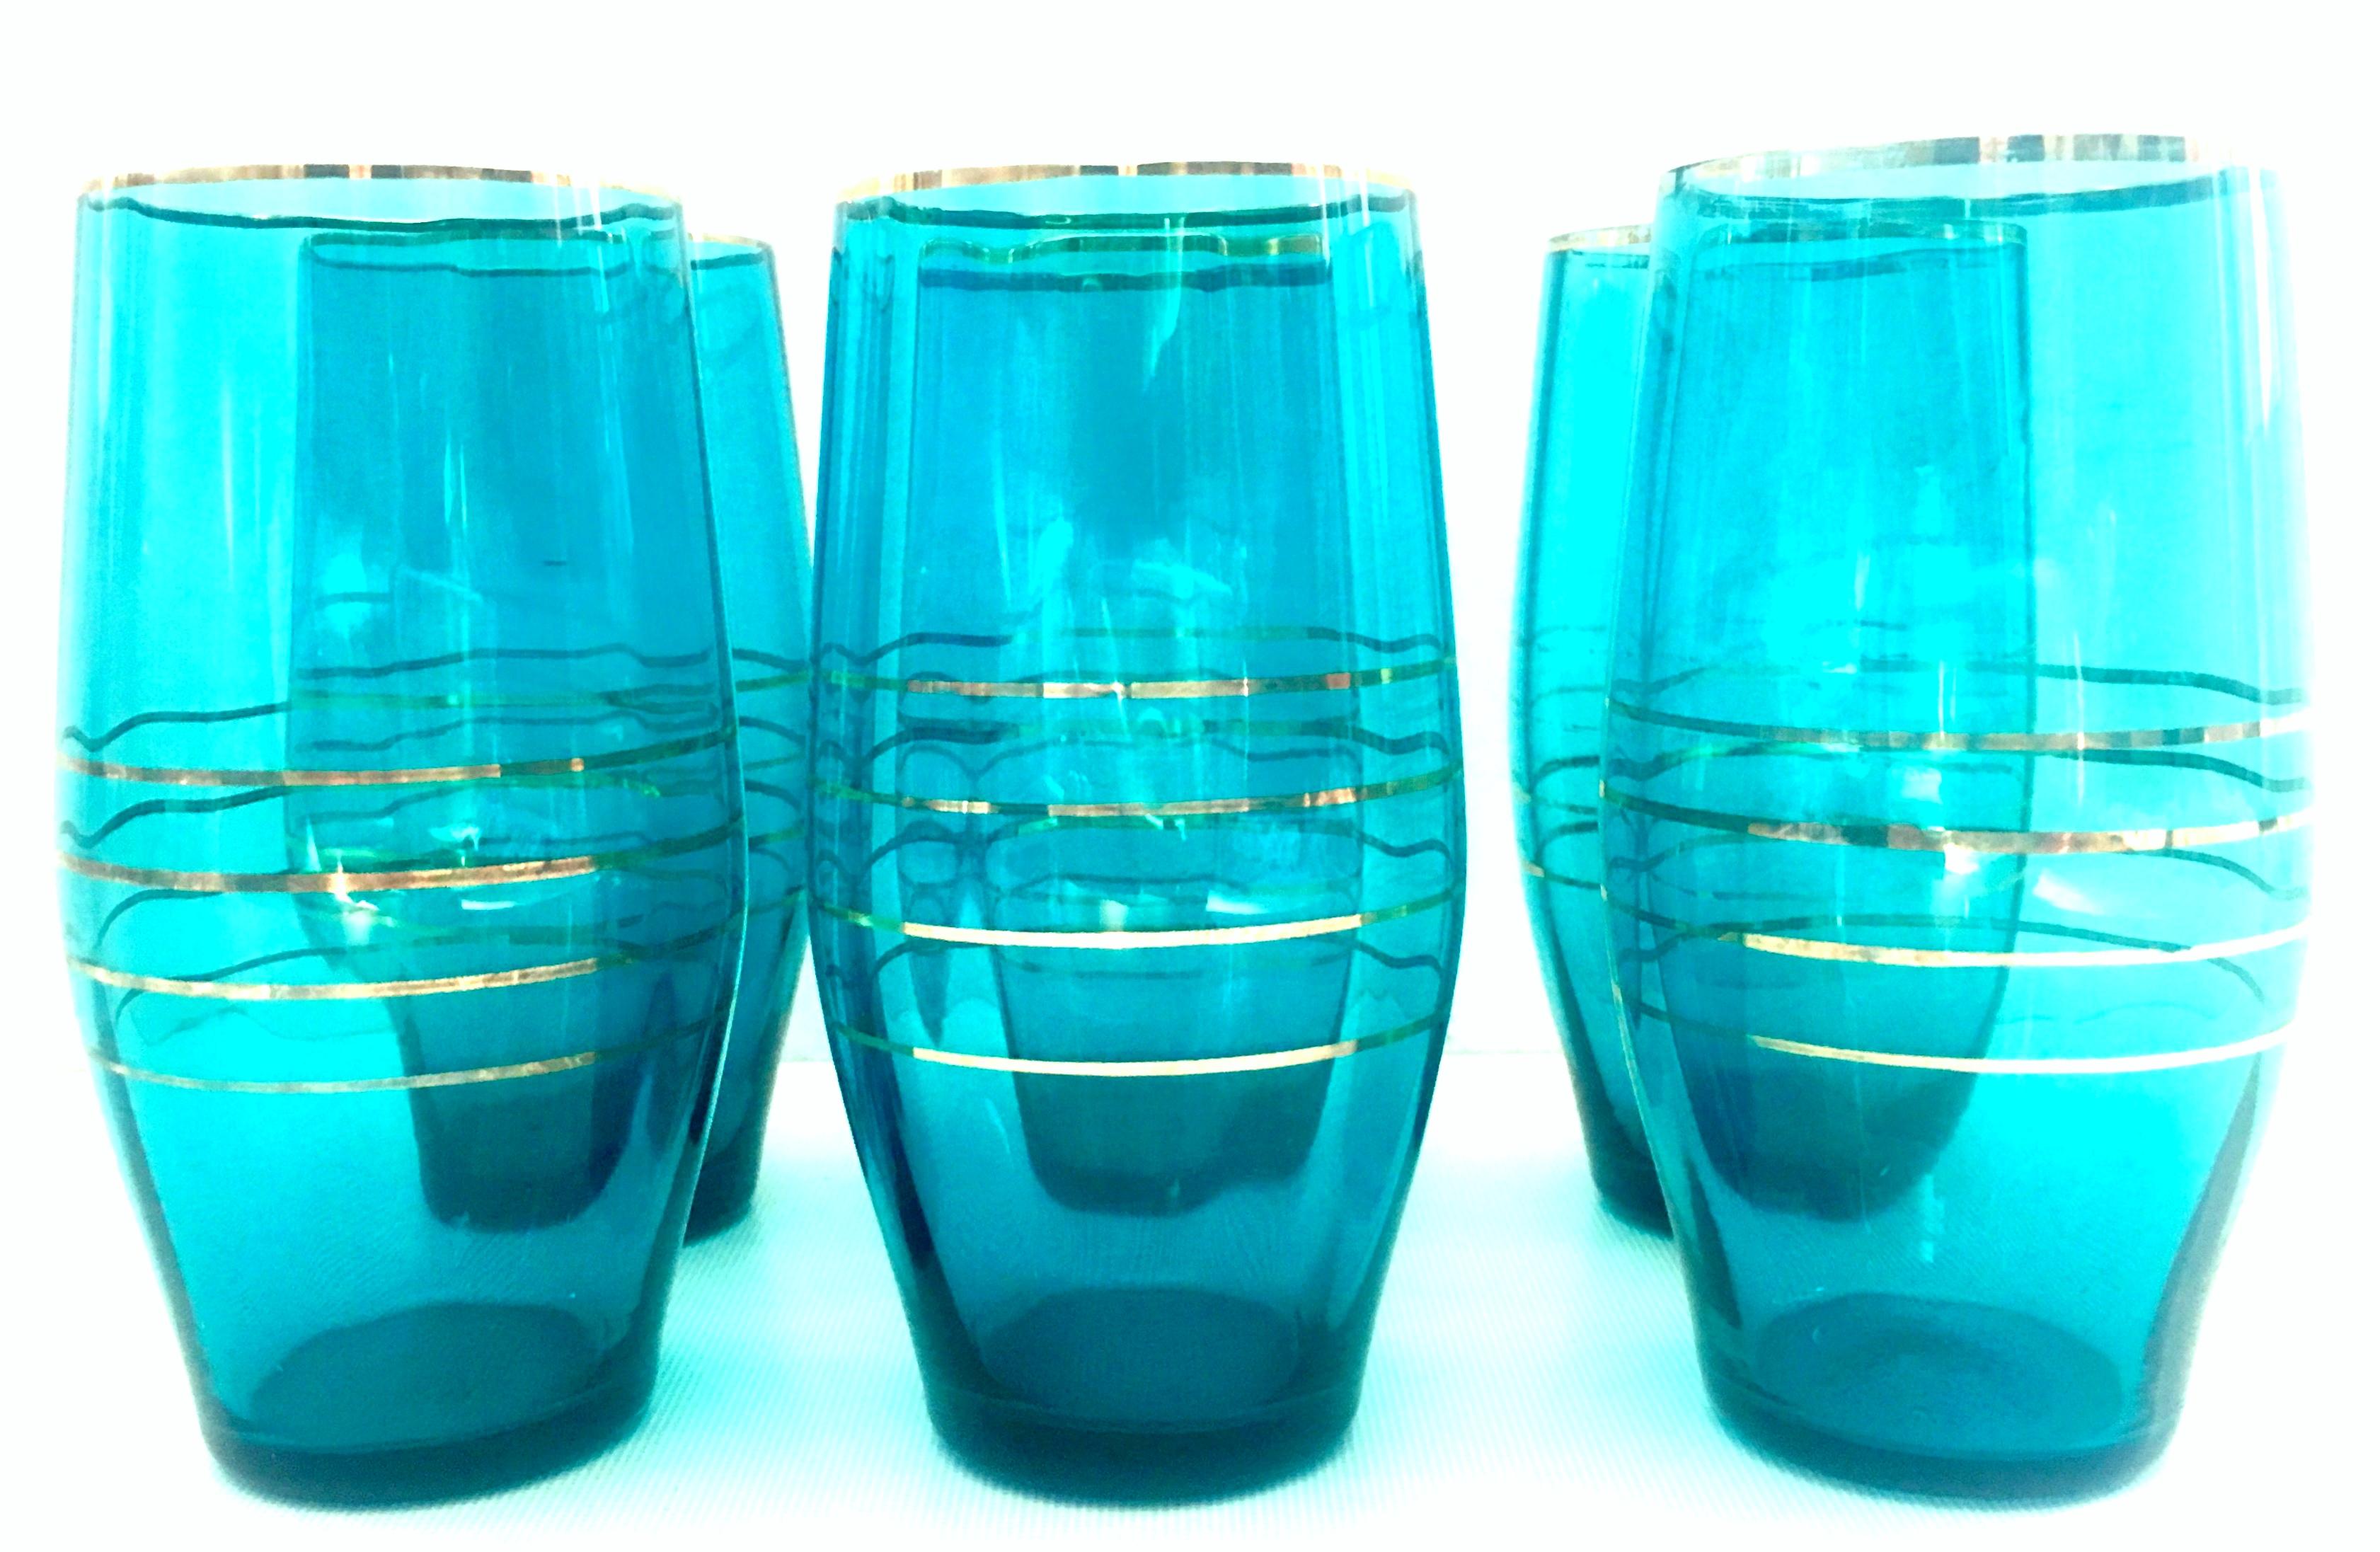 Mid-20th century modern blown glass & 22-karat gold drink glass set of six pieces. These turquoise and 22-karat trim optic blown glass tumblers are a set of six pieces.